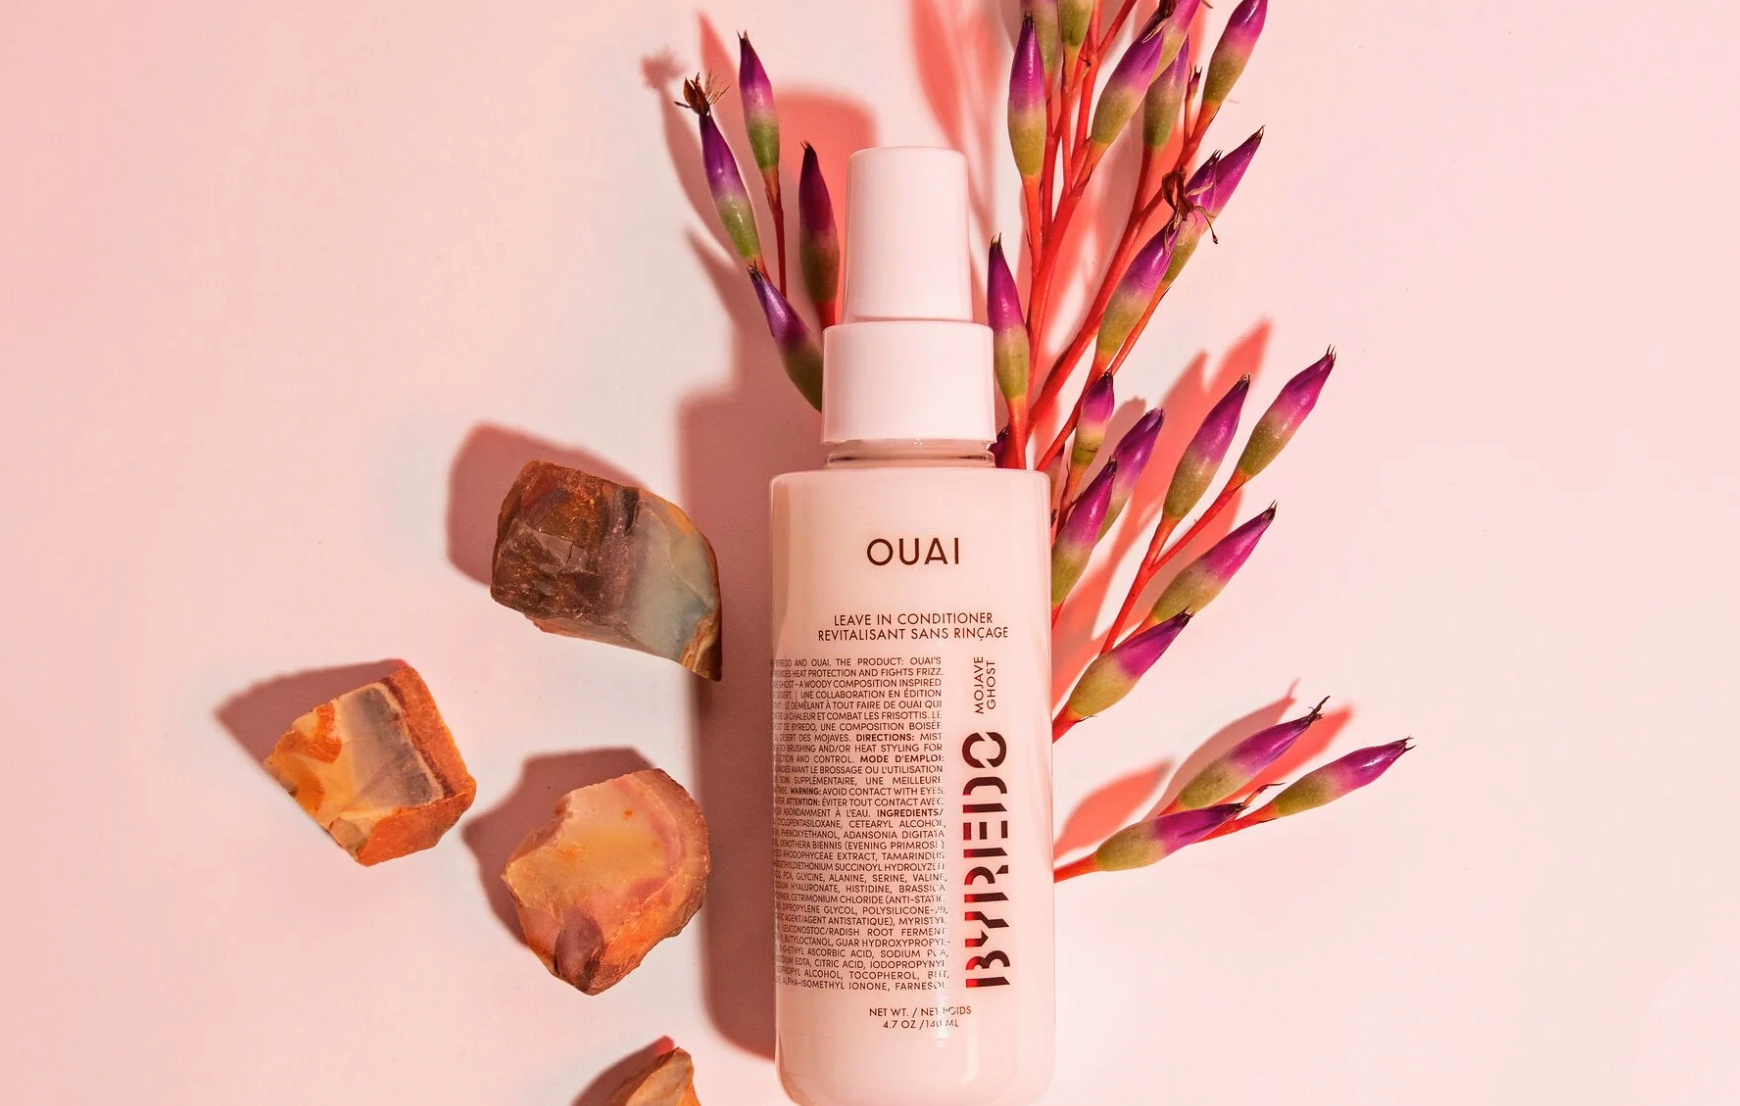 Pink OUAI and BYREDO leave-in conditioner bottle on purple and green flowers and a pink background